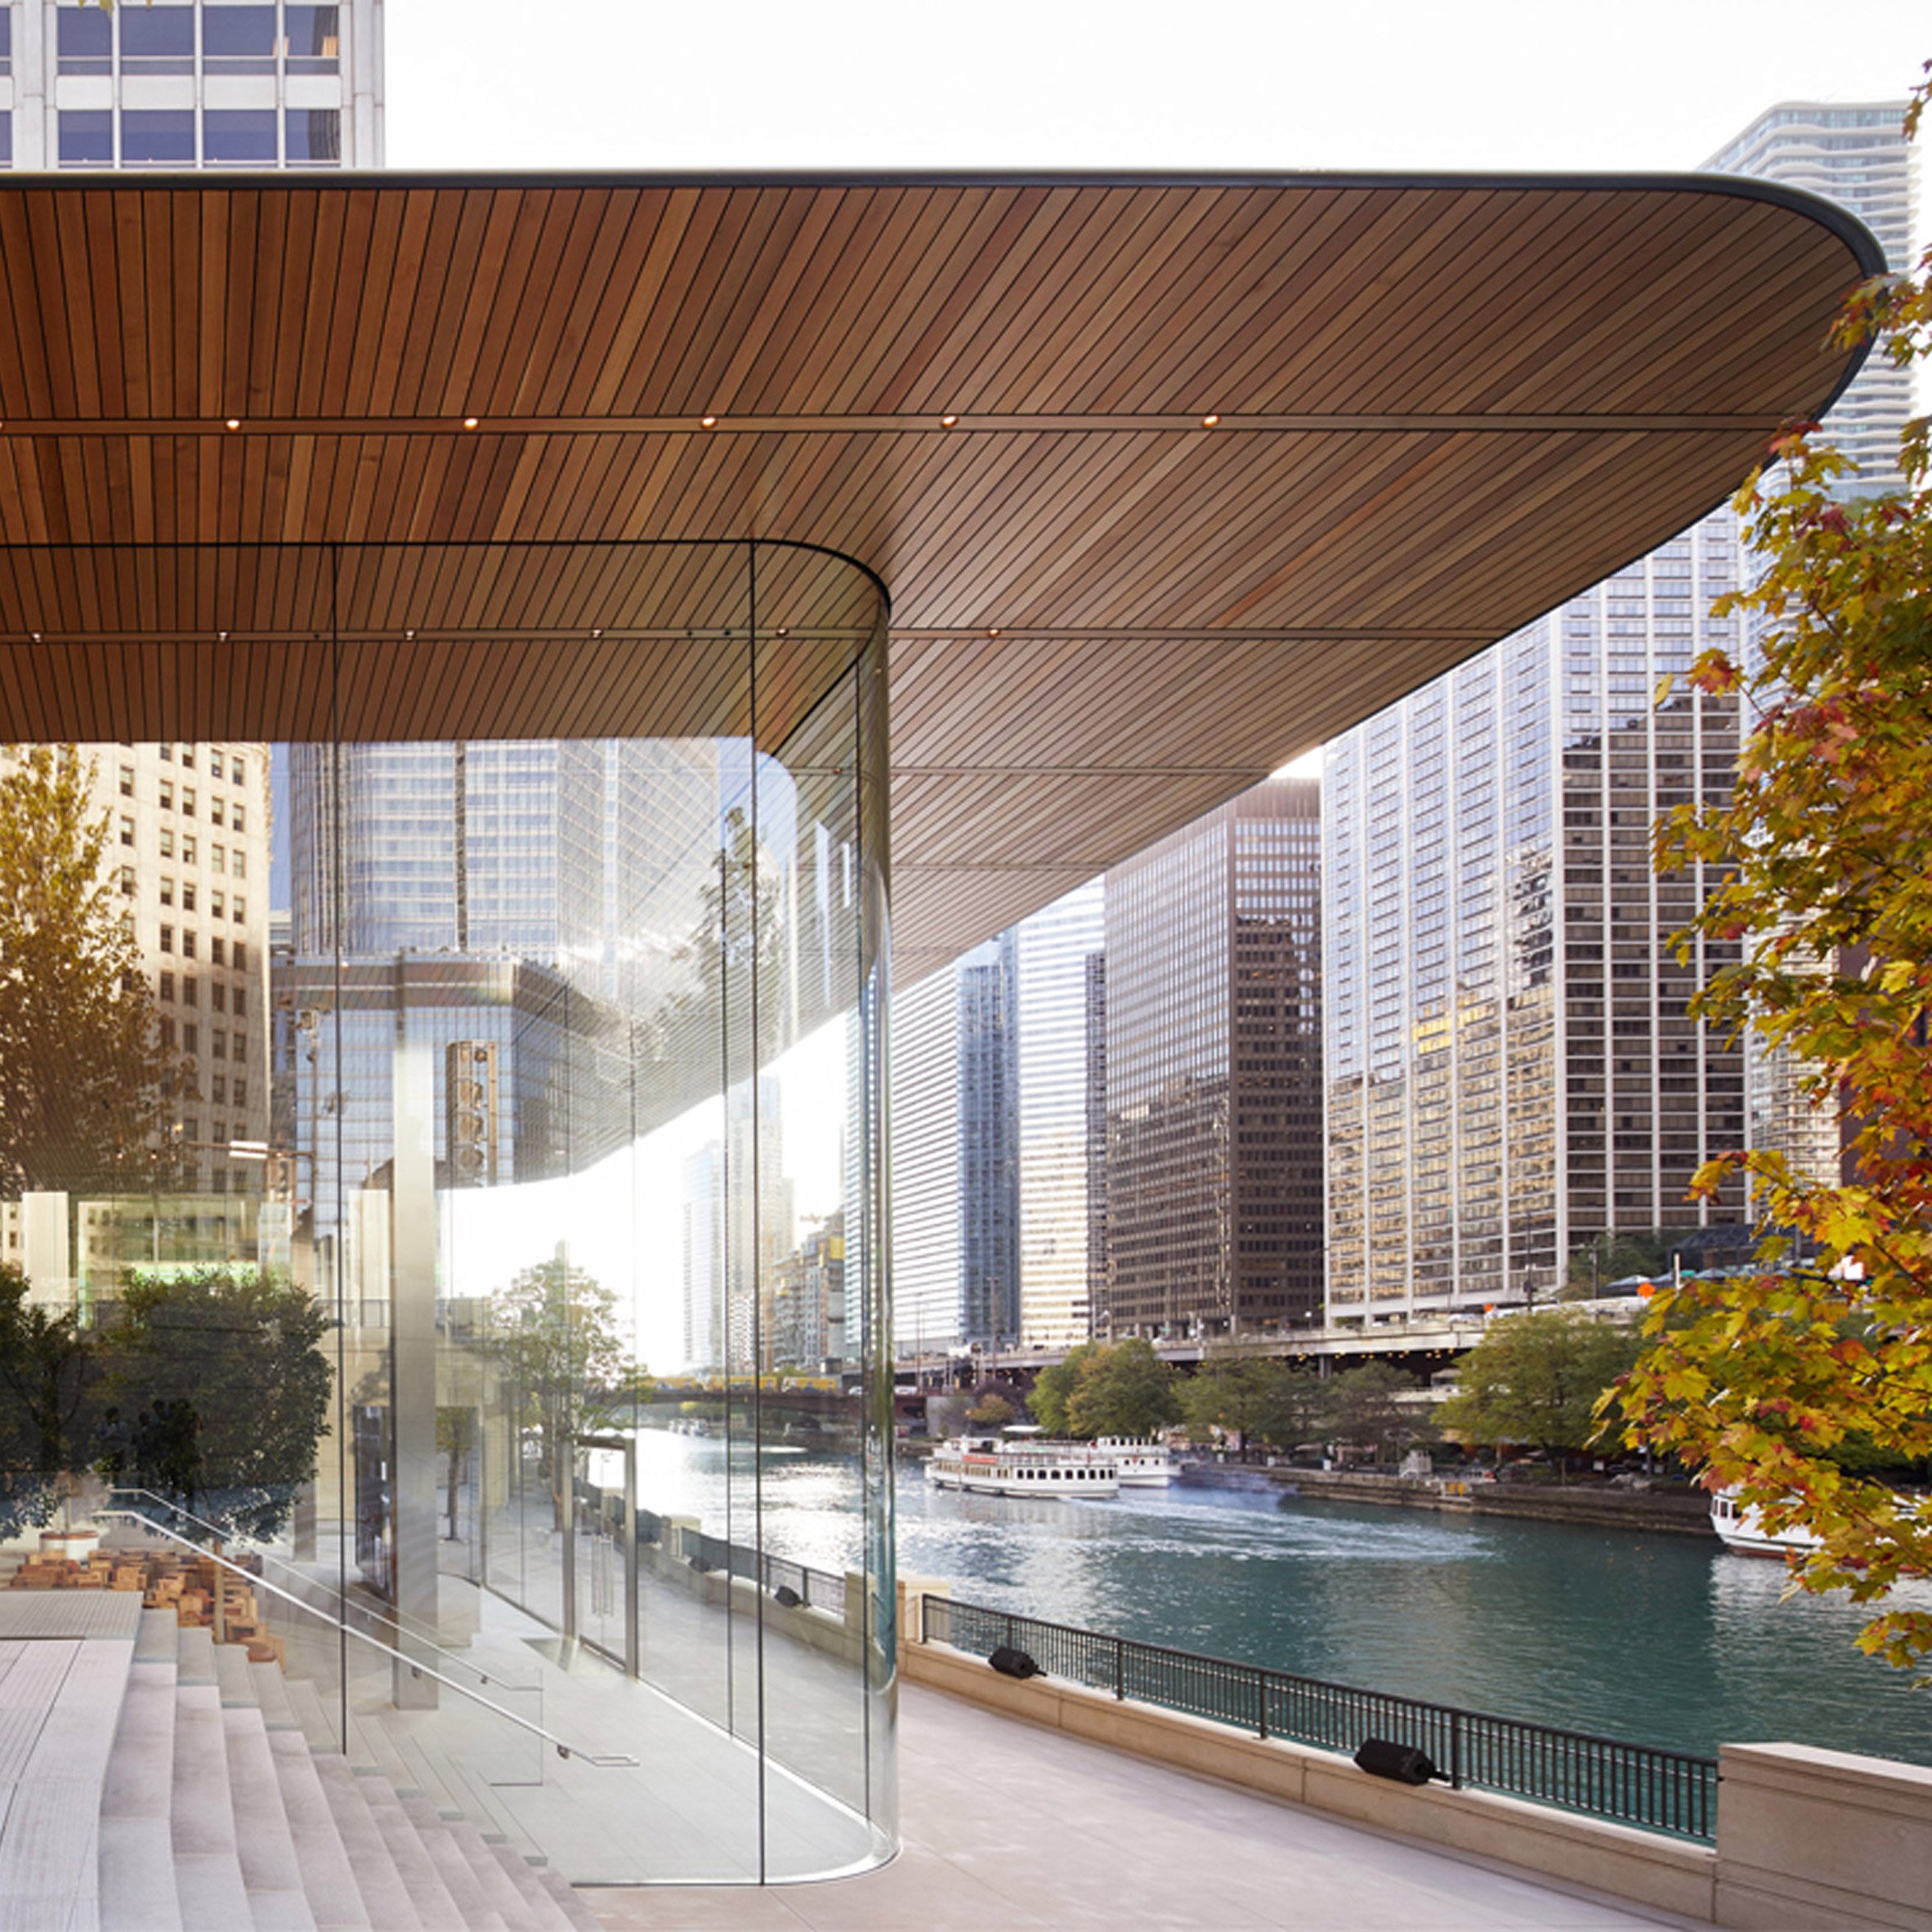 Apple retail store in Chicago full of glass and places to mingle